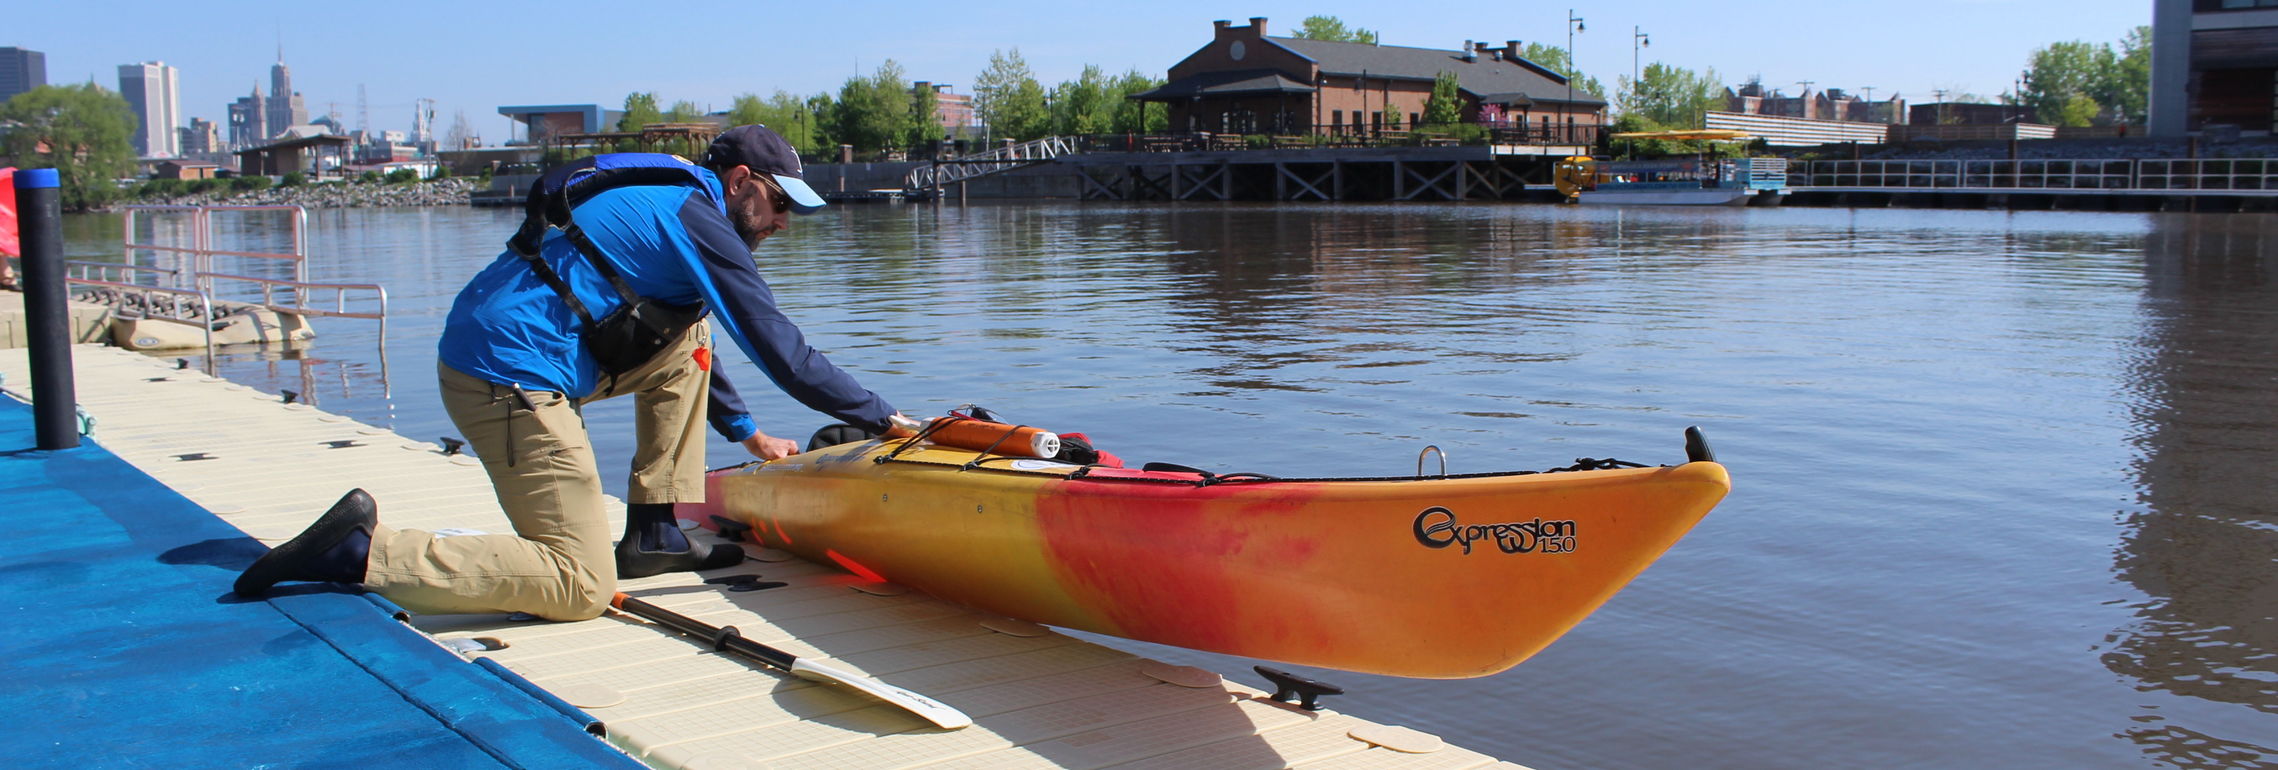 PERFECT FOR PADDLING: 4 SITES TO SEE ON THE WATERS OF THE BUFFALO BLUEWAY